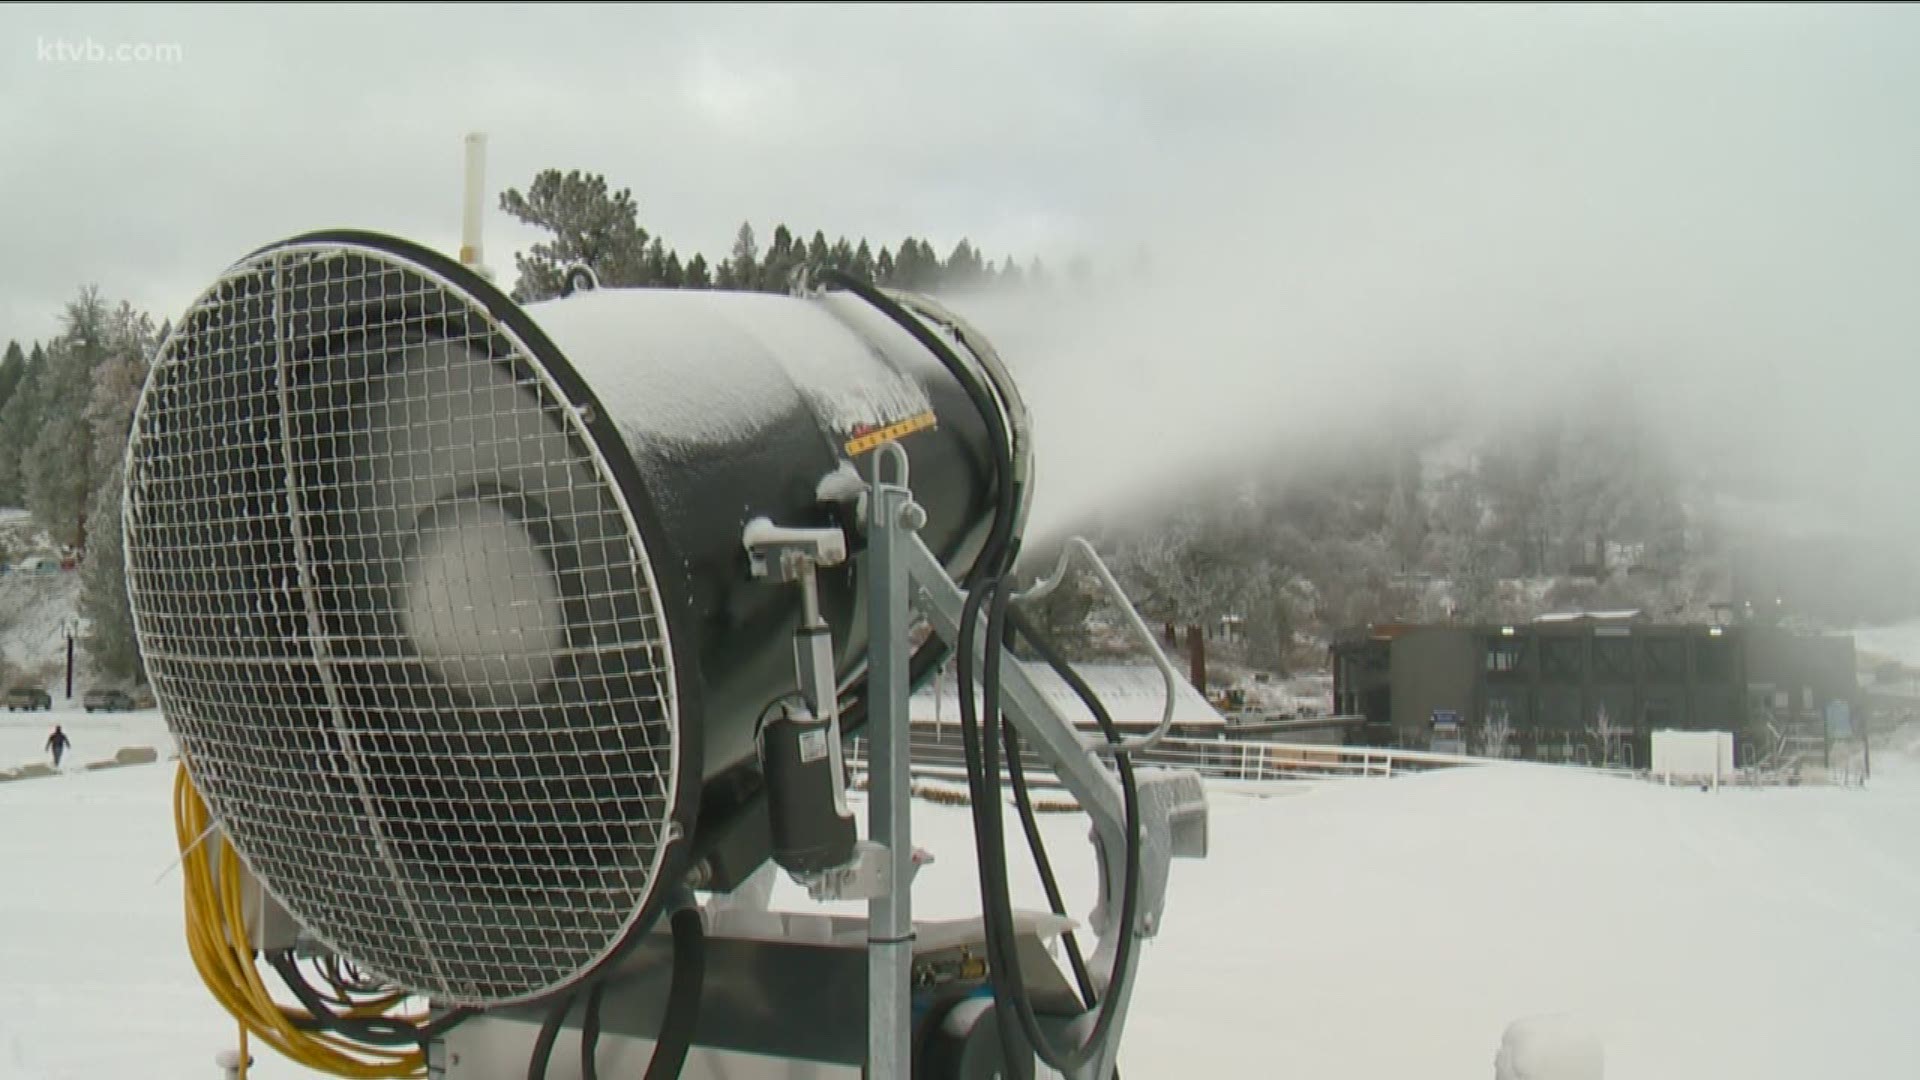 The resort's new snowmaking system is being relied on heavily right now.